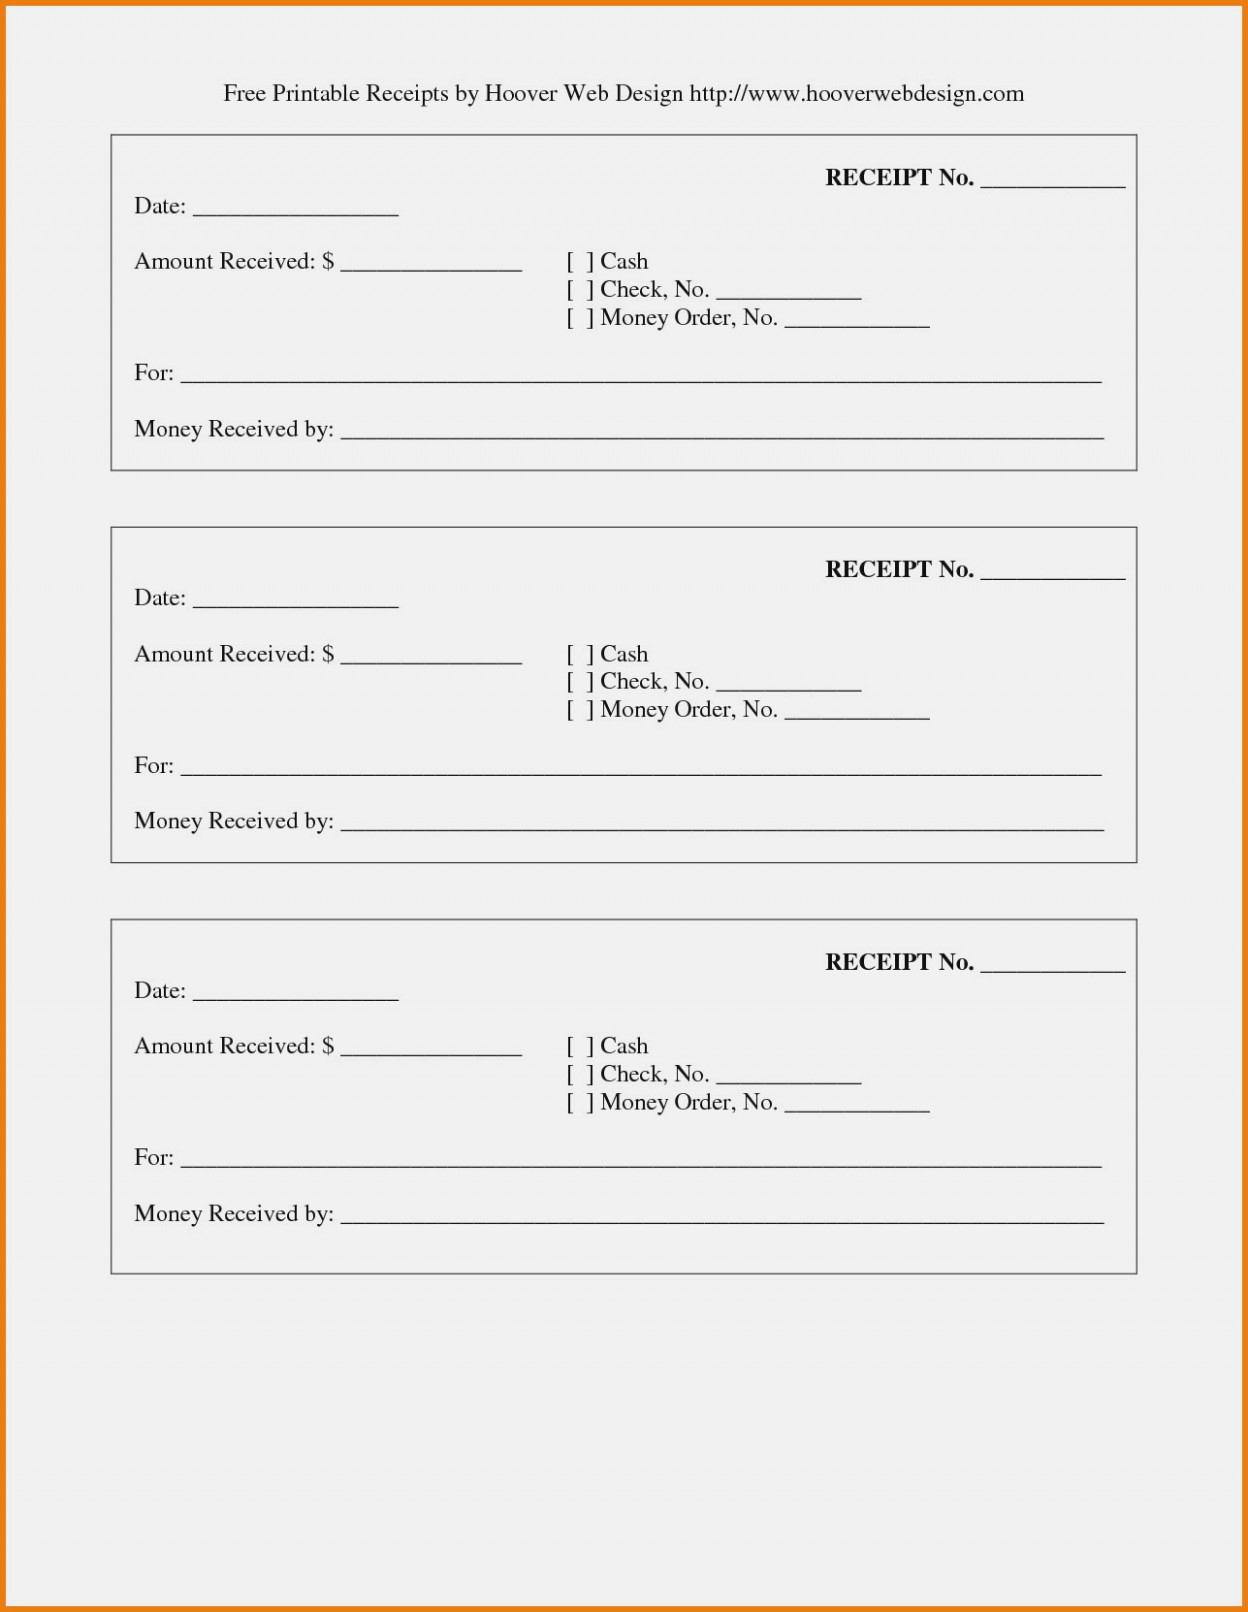 Daycare Receipt Template Excel New Best Child Care Receipt Template - Free Printable Daycare Receipts